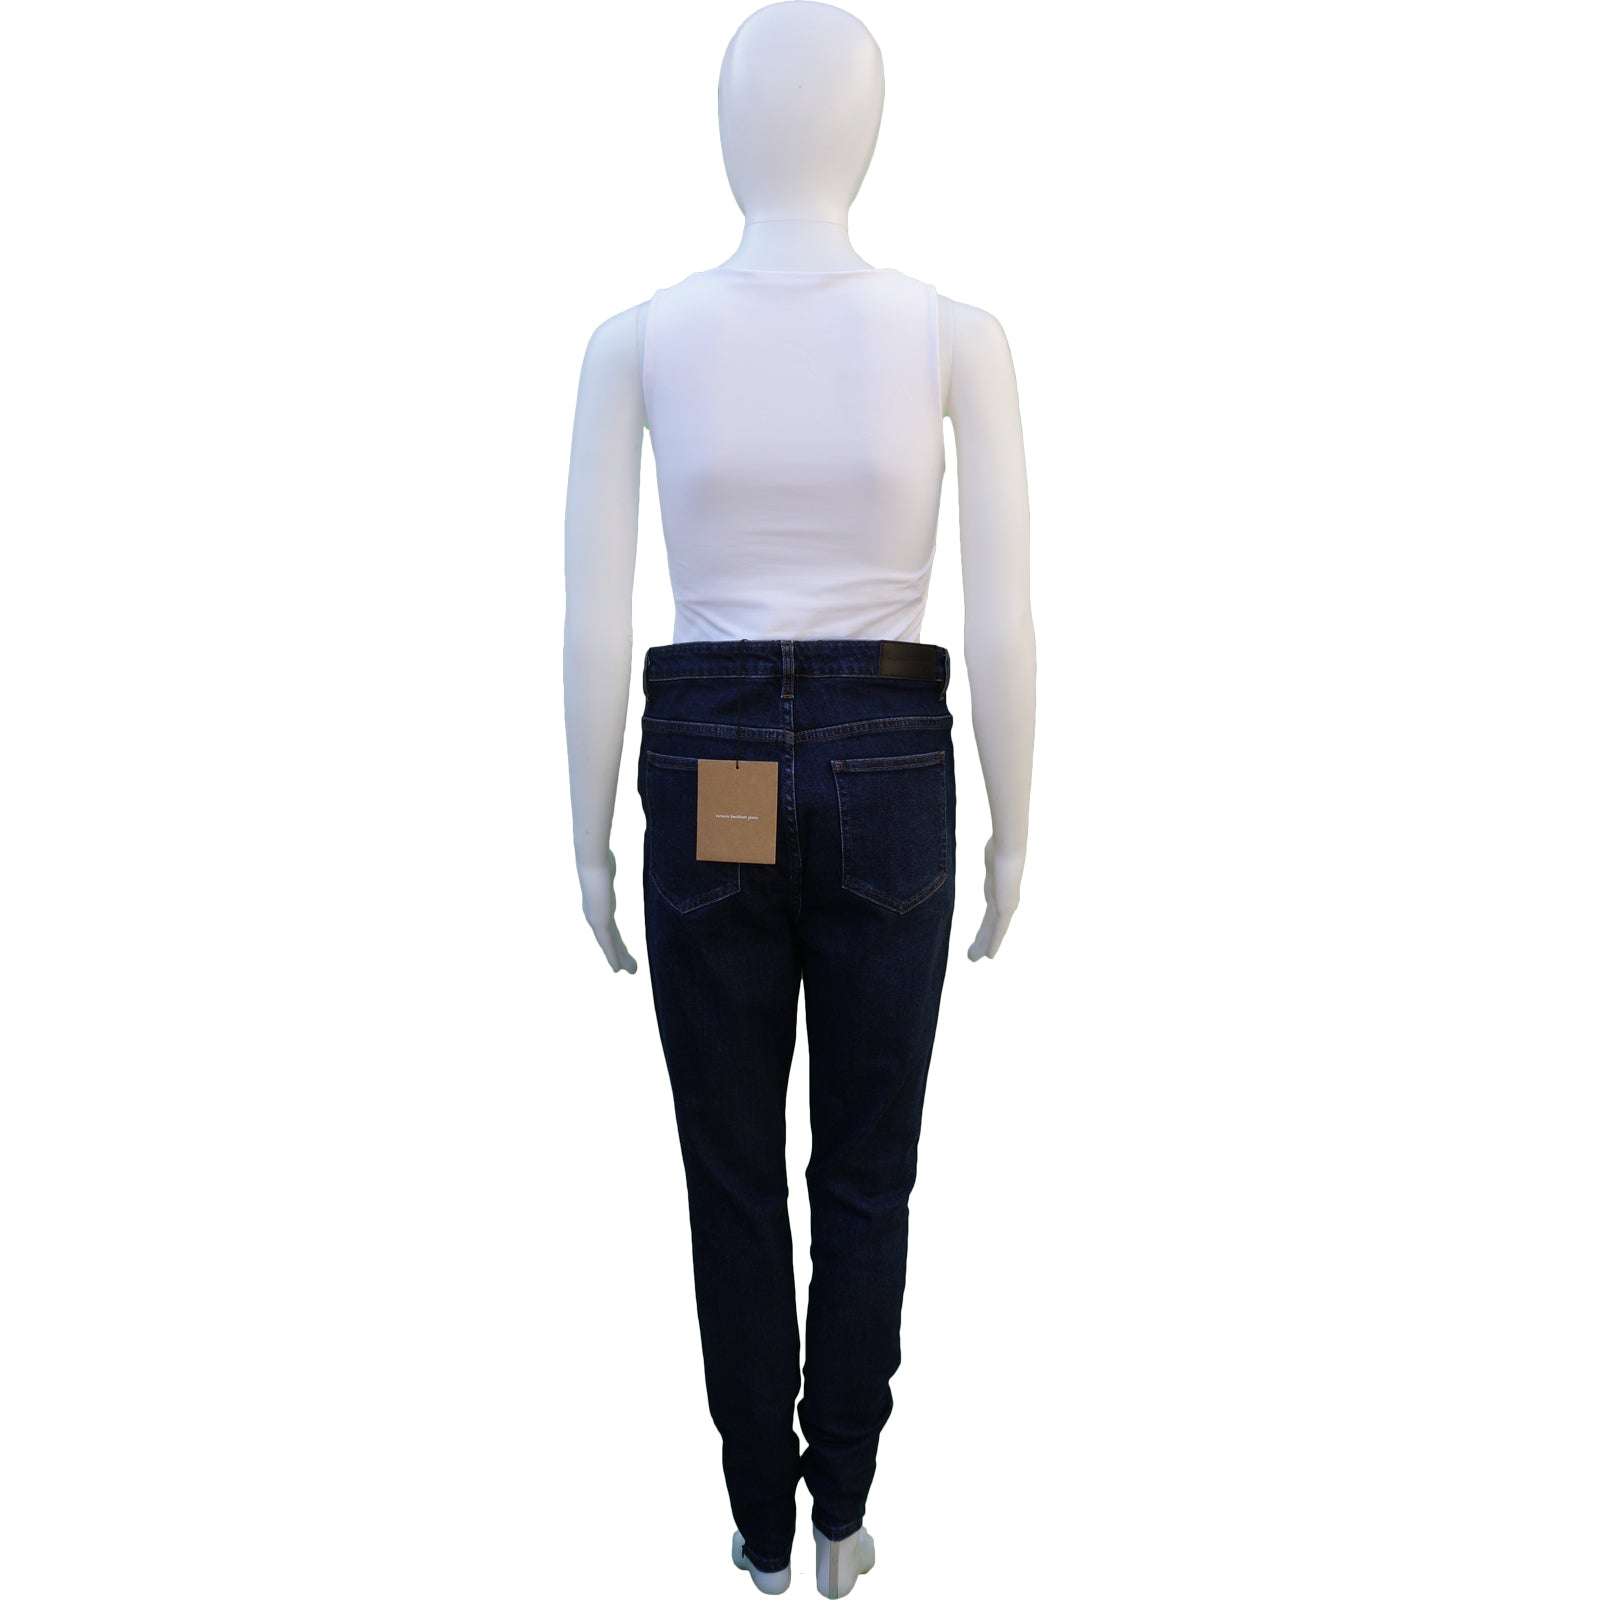 VICTORIA BECKHAM HIGH-RISE SKINNY JEANS NEW WITH TAGS SIZE 30 - leefluxury.com